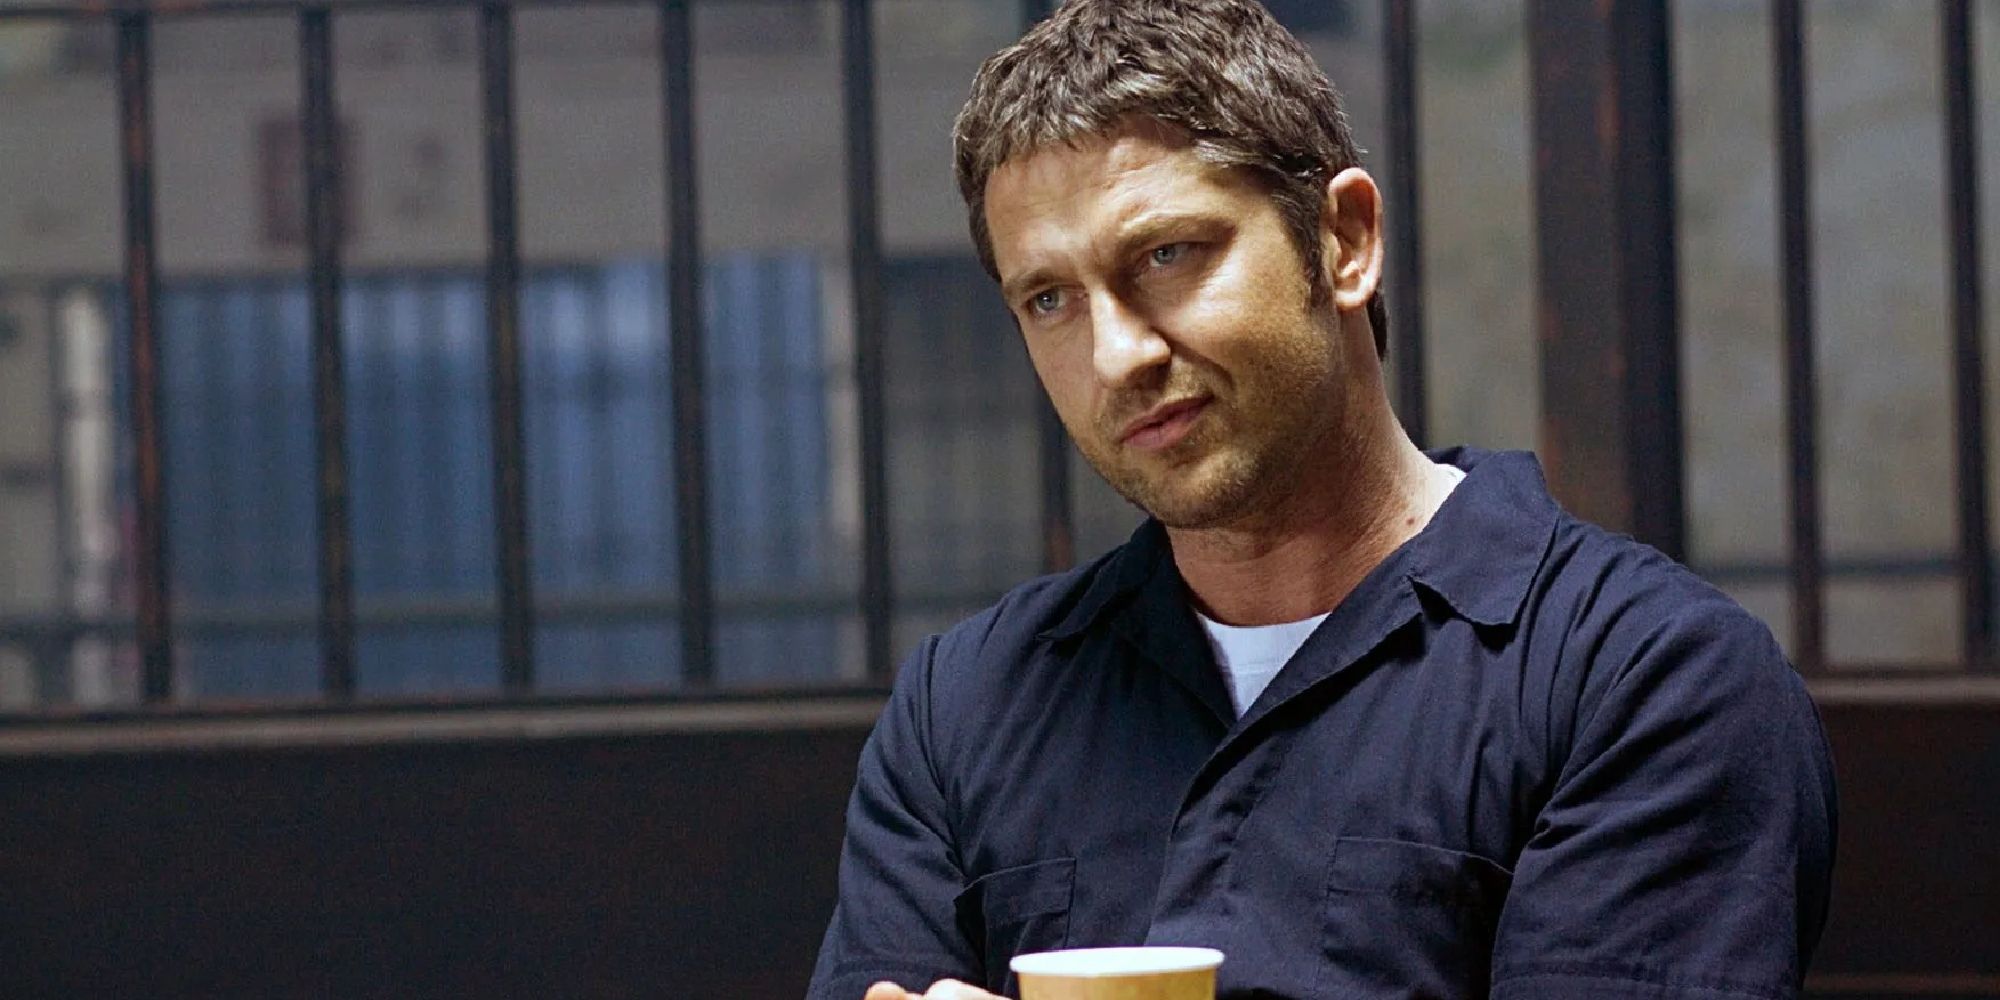 Gerard Butler as Clyde Shelton in prison looking seriously at something off-camera in Law Abiding Citizen